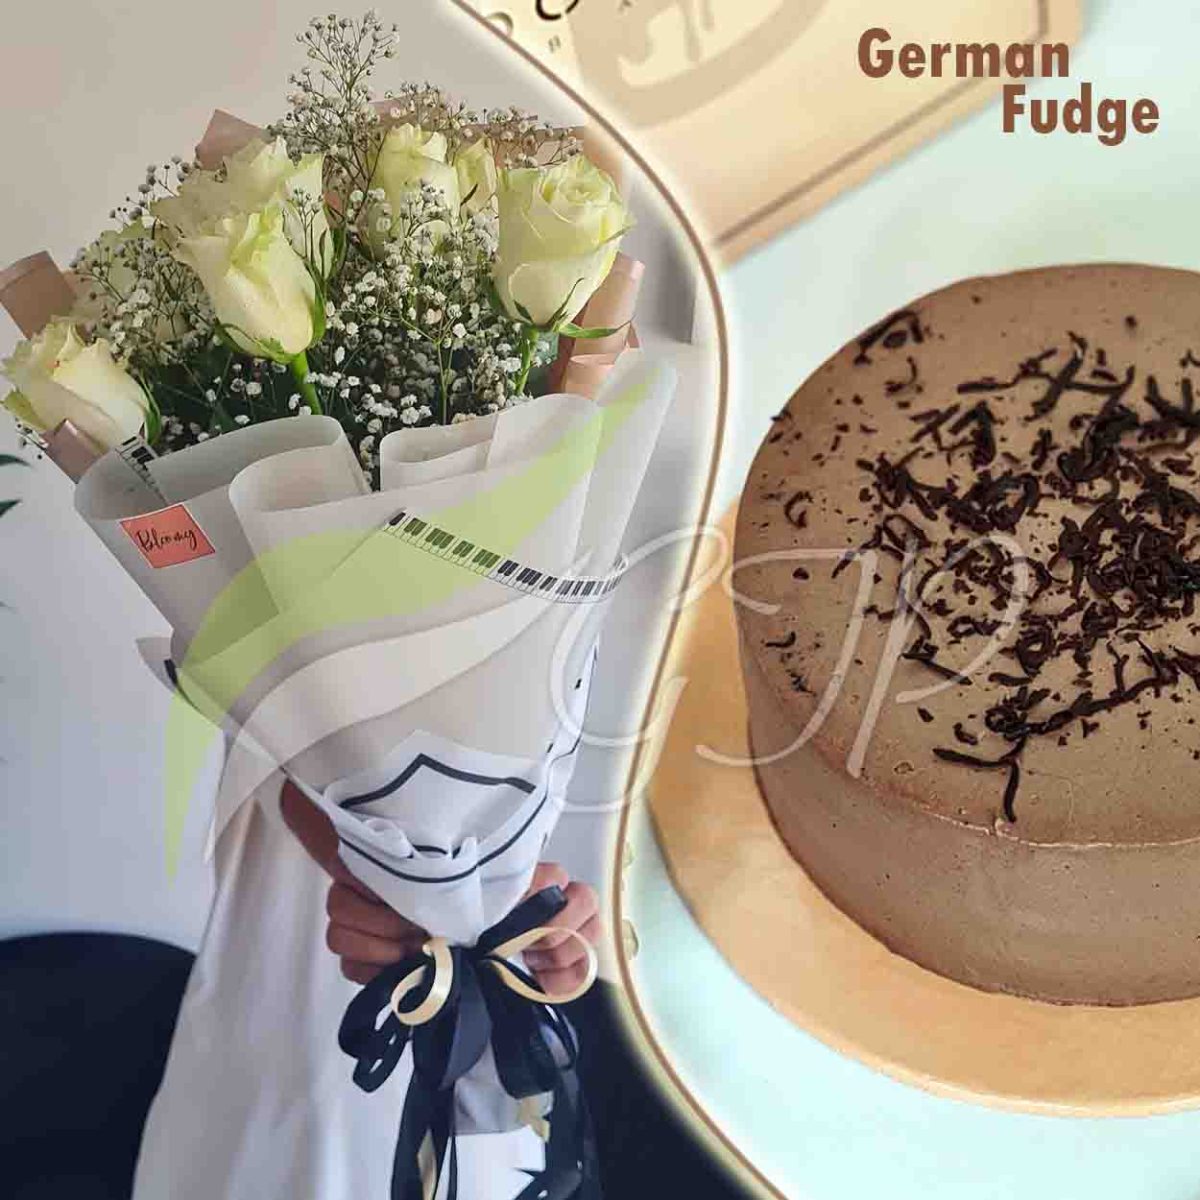 Sweet and Pure: A photo of a gift pack consisting of a bouquet of white roses and a German fudge cake